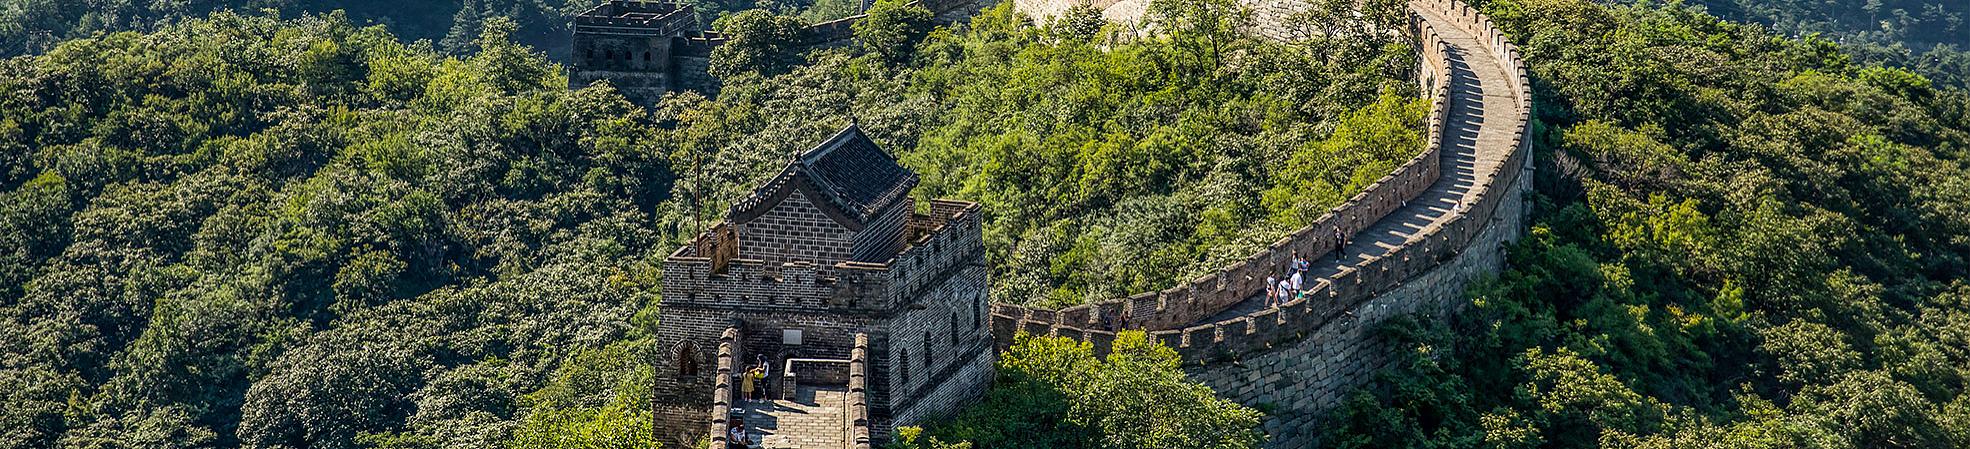 Beijing-The Great Wall